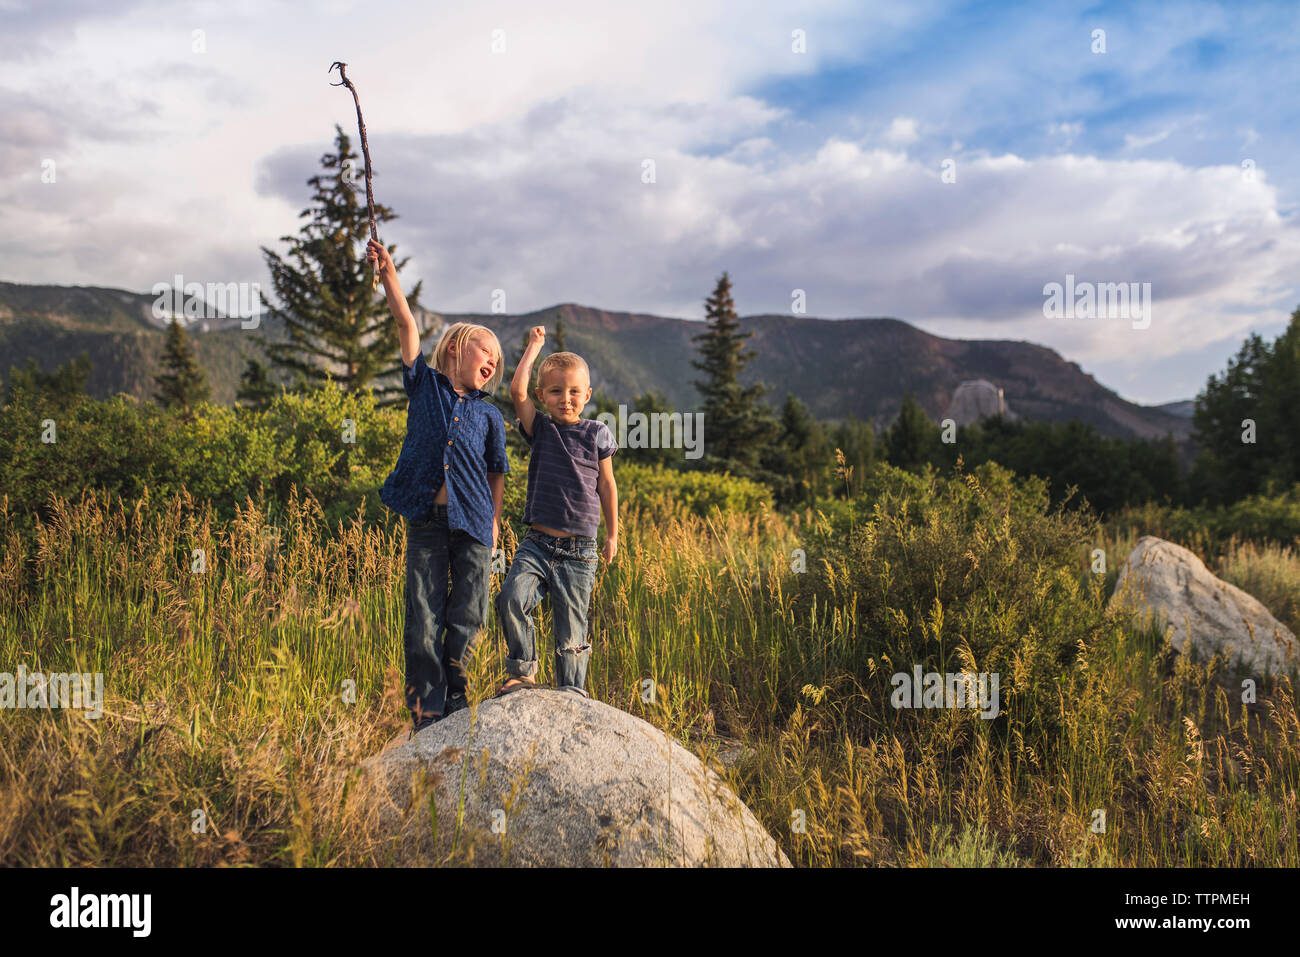 Playful brothers with arms raised standing on rock against mountains Stock Photo